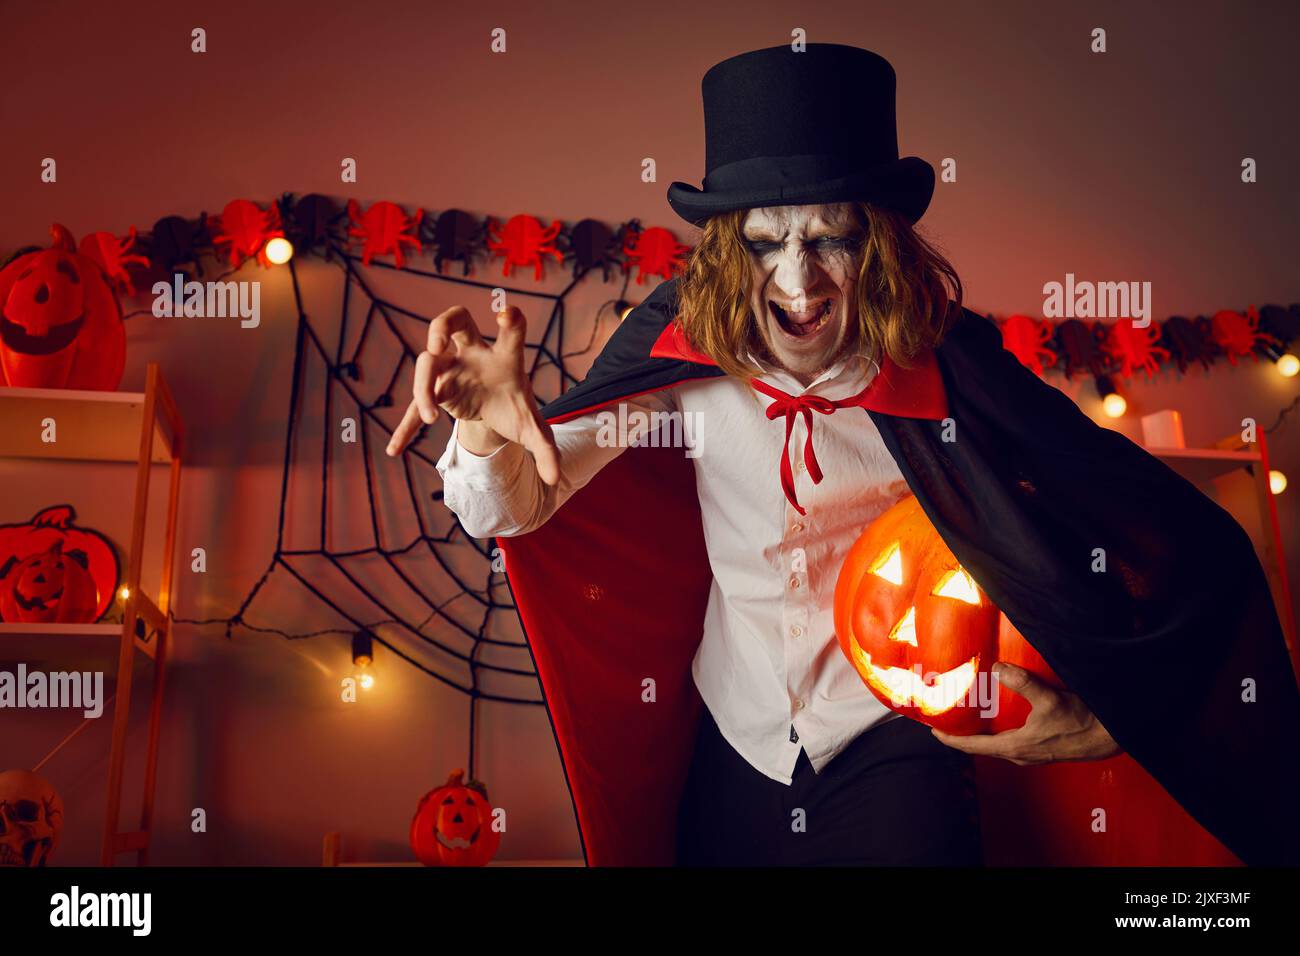 Man dressed up in costume of spooky evil vampire holding jack-o-lantern and hissing Stock Photo